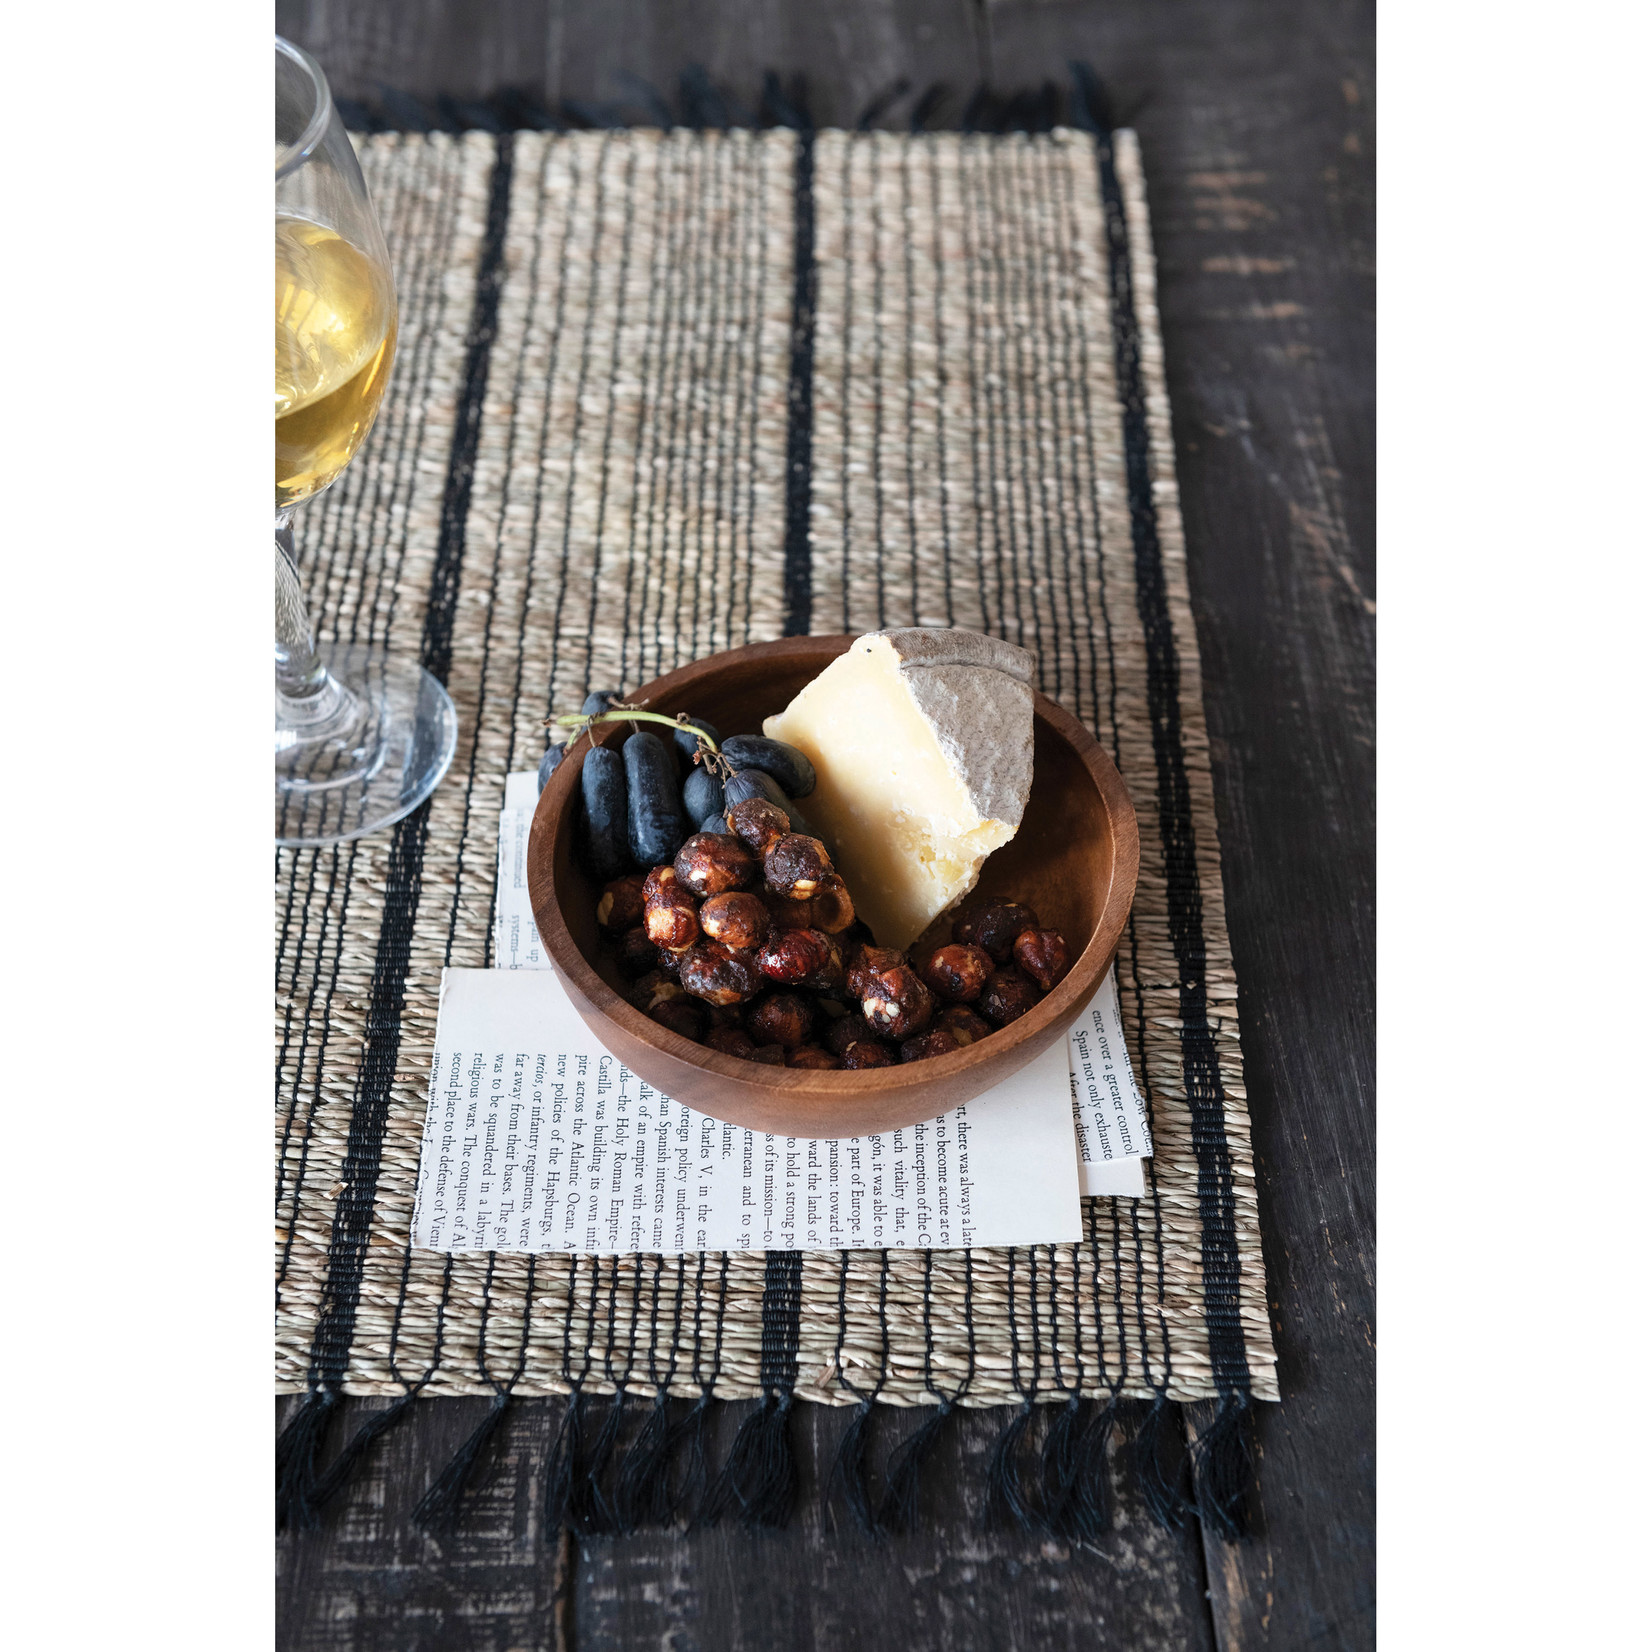 creative Co-op Bamboo Placemat with Stripes & Fringe